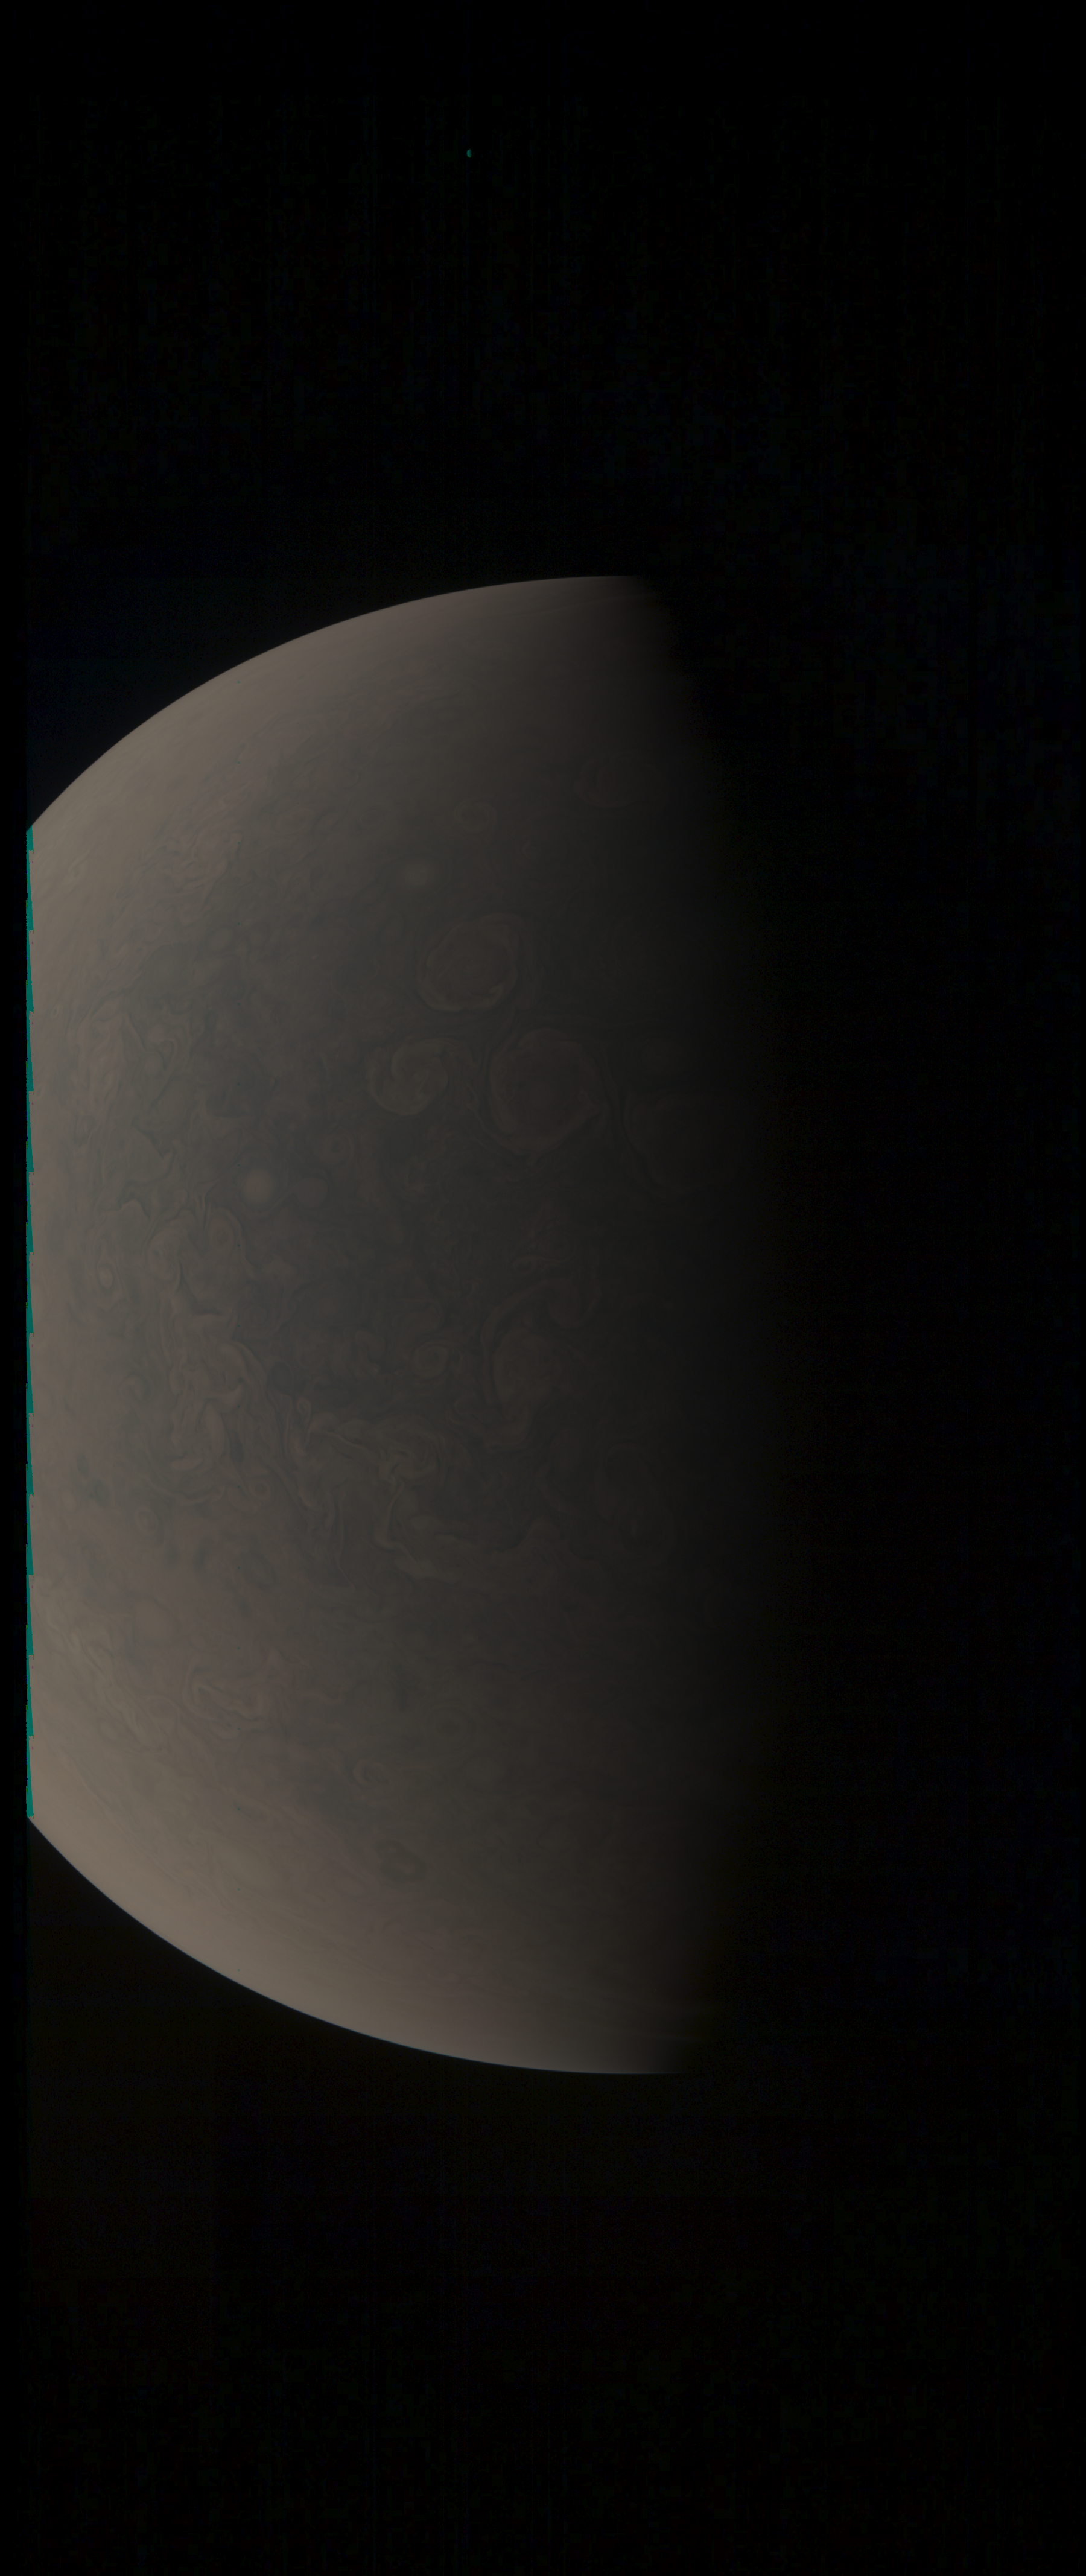 JNCE_2022056_40C00010_V01-raw_proc_hollow_sphere_c_pj_out.BMP_thumbnail_.png